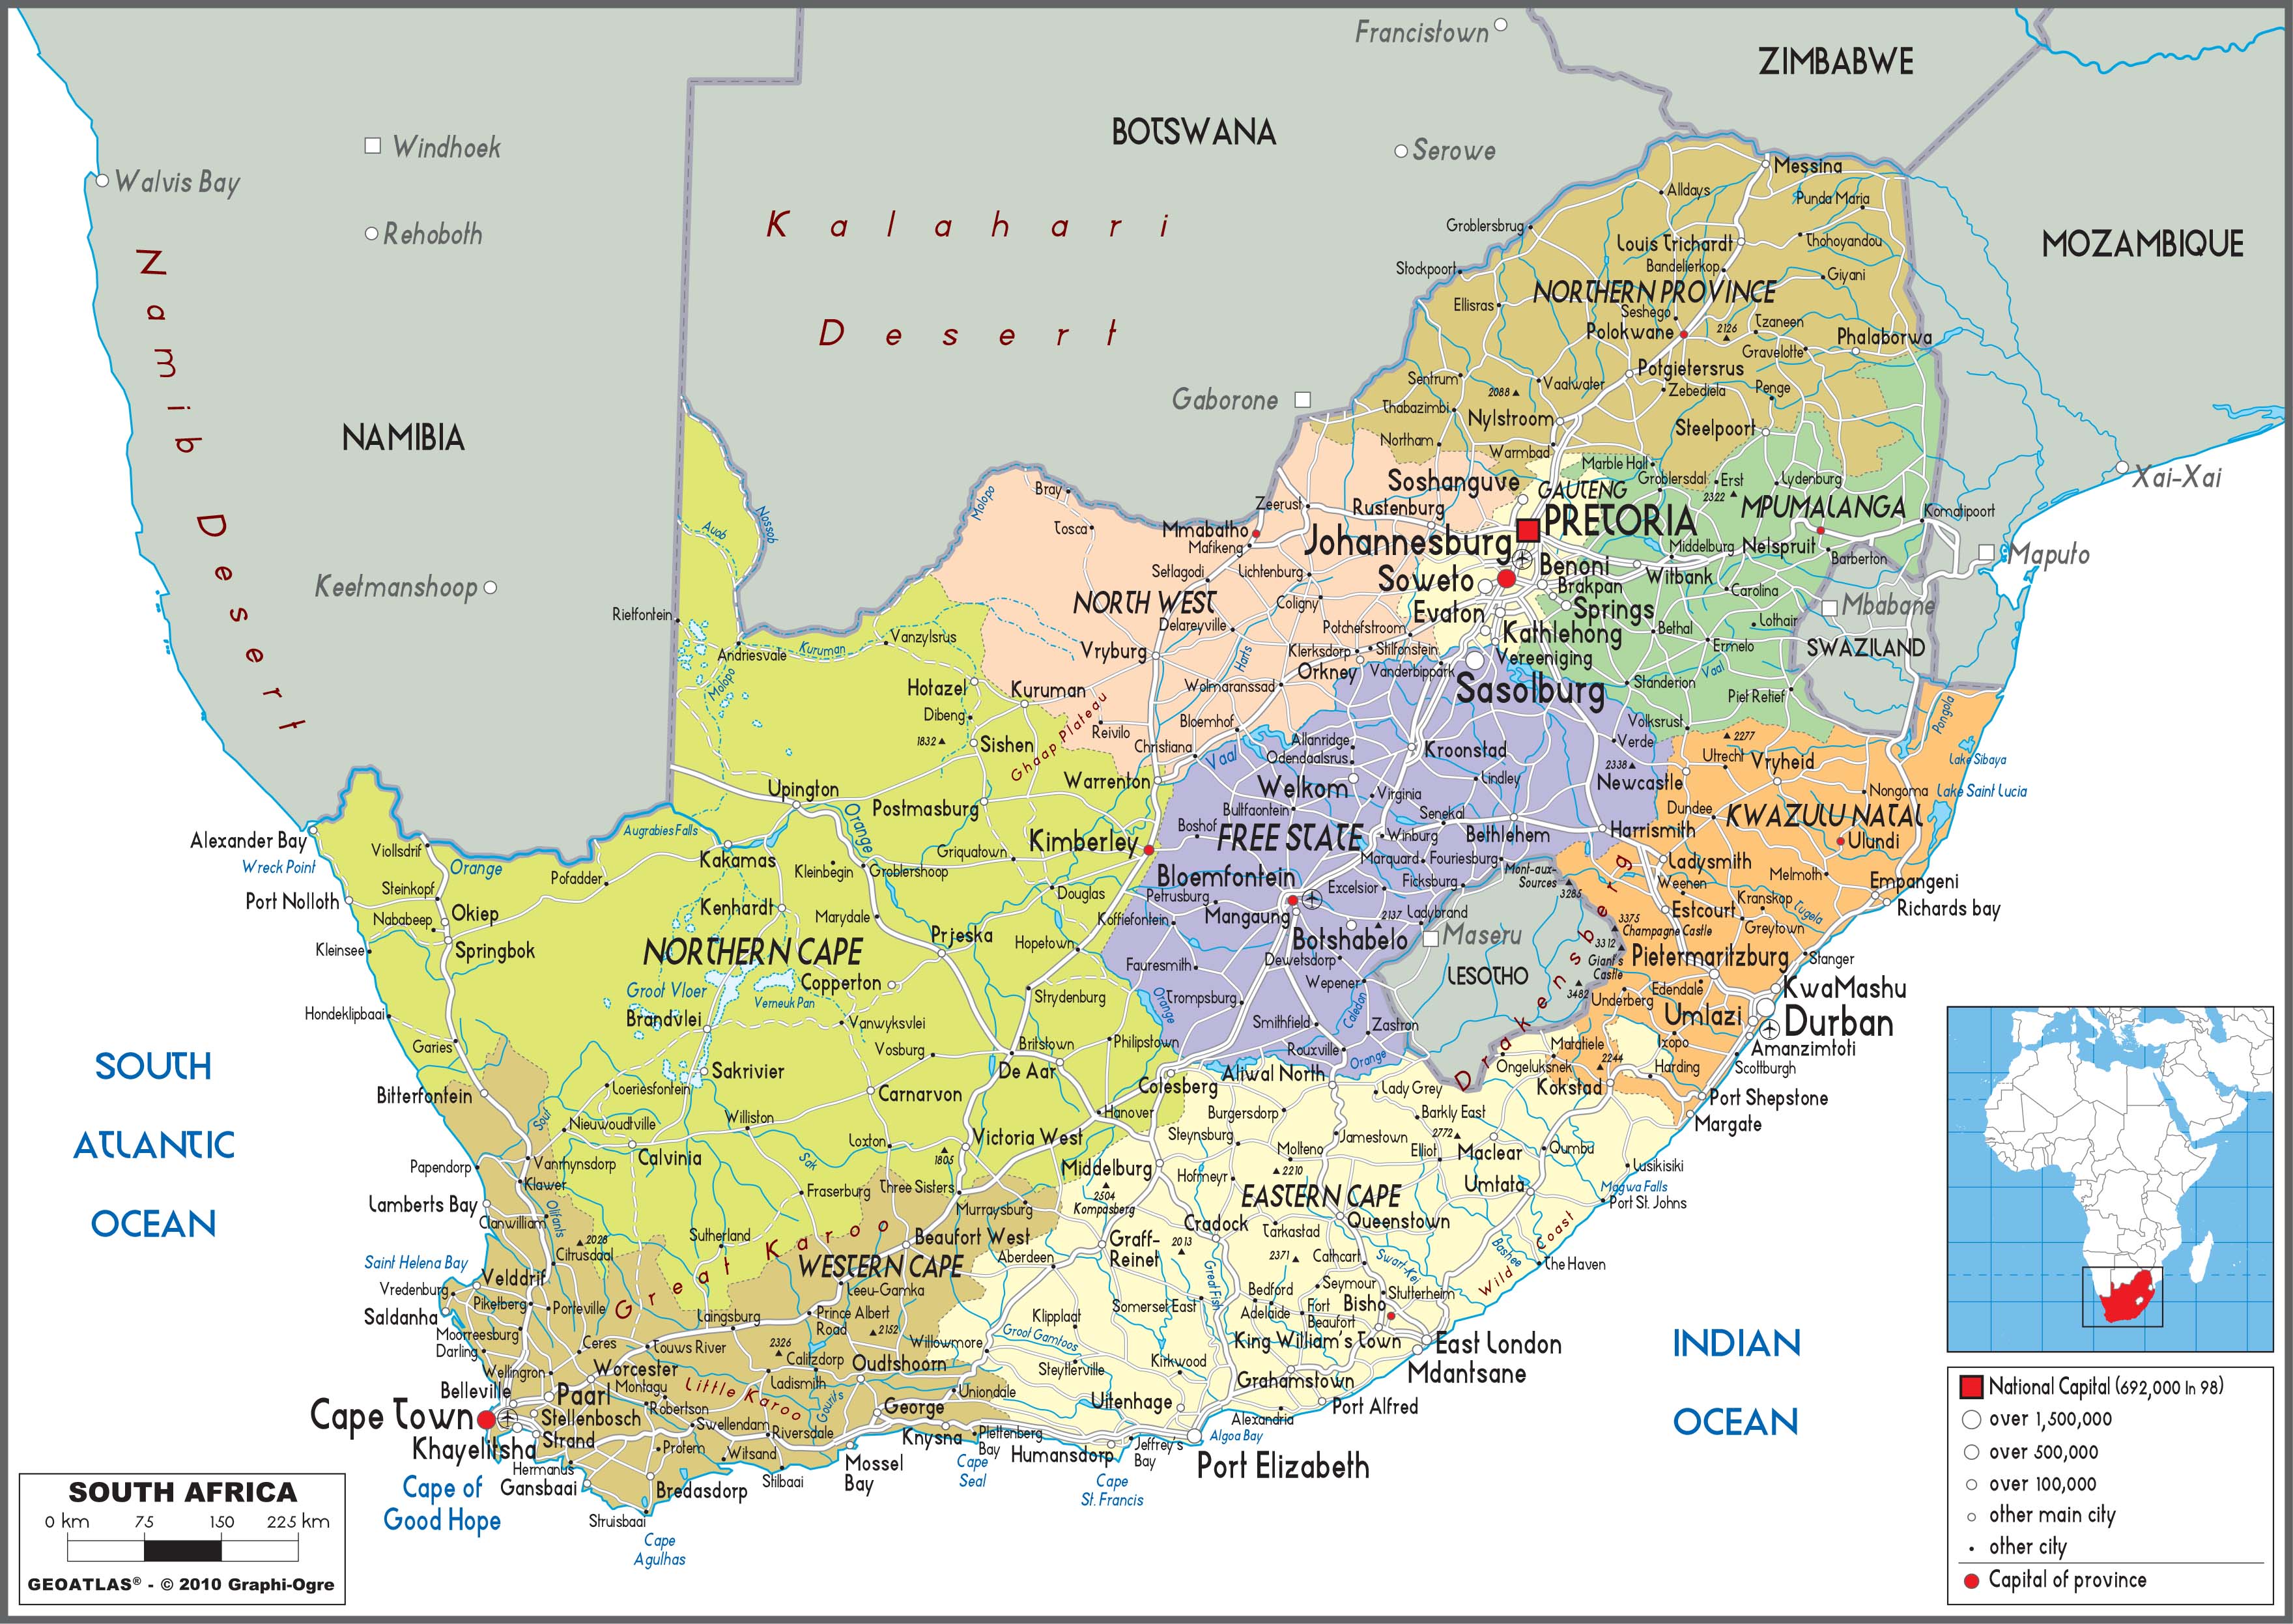 Political Map Of Southern Africa